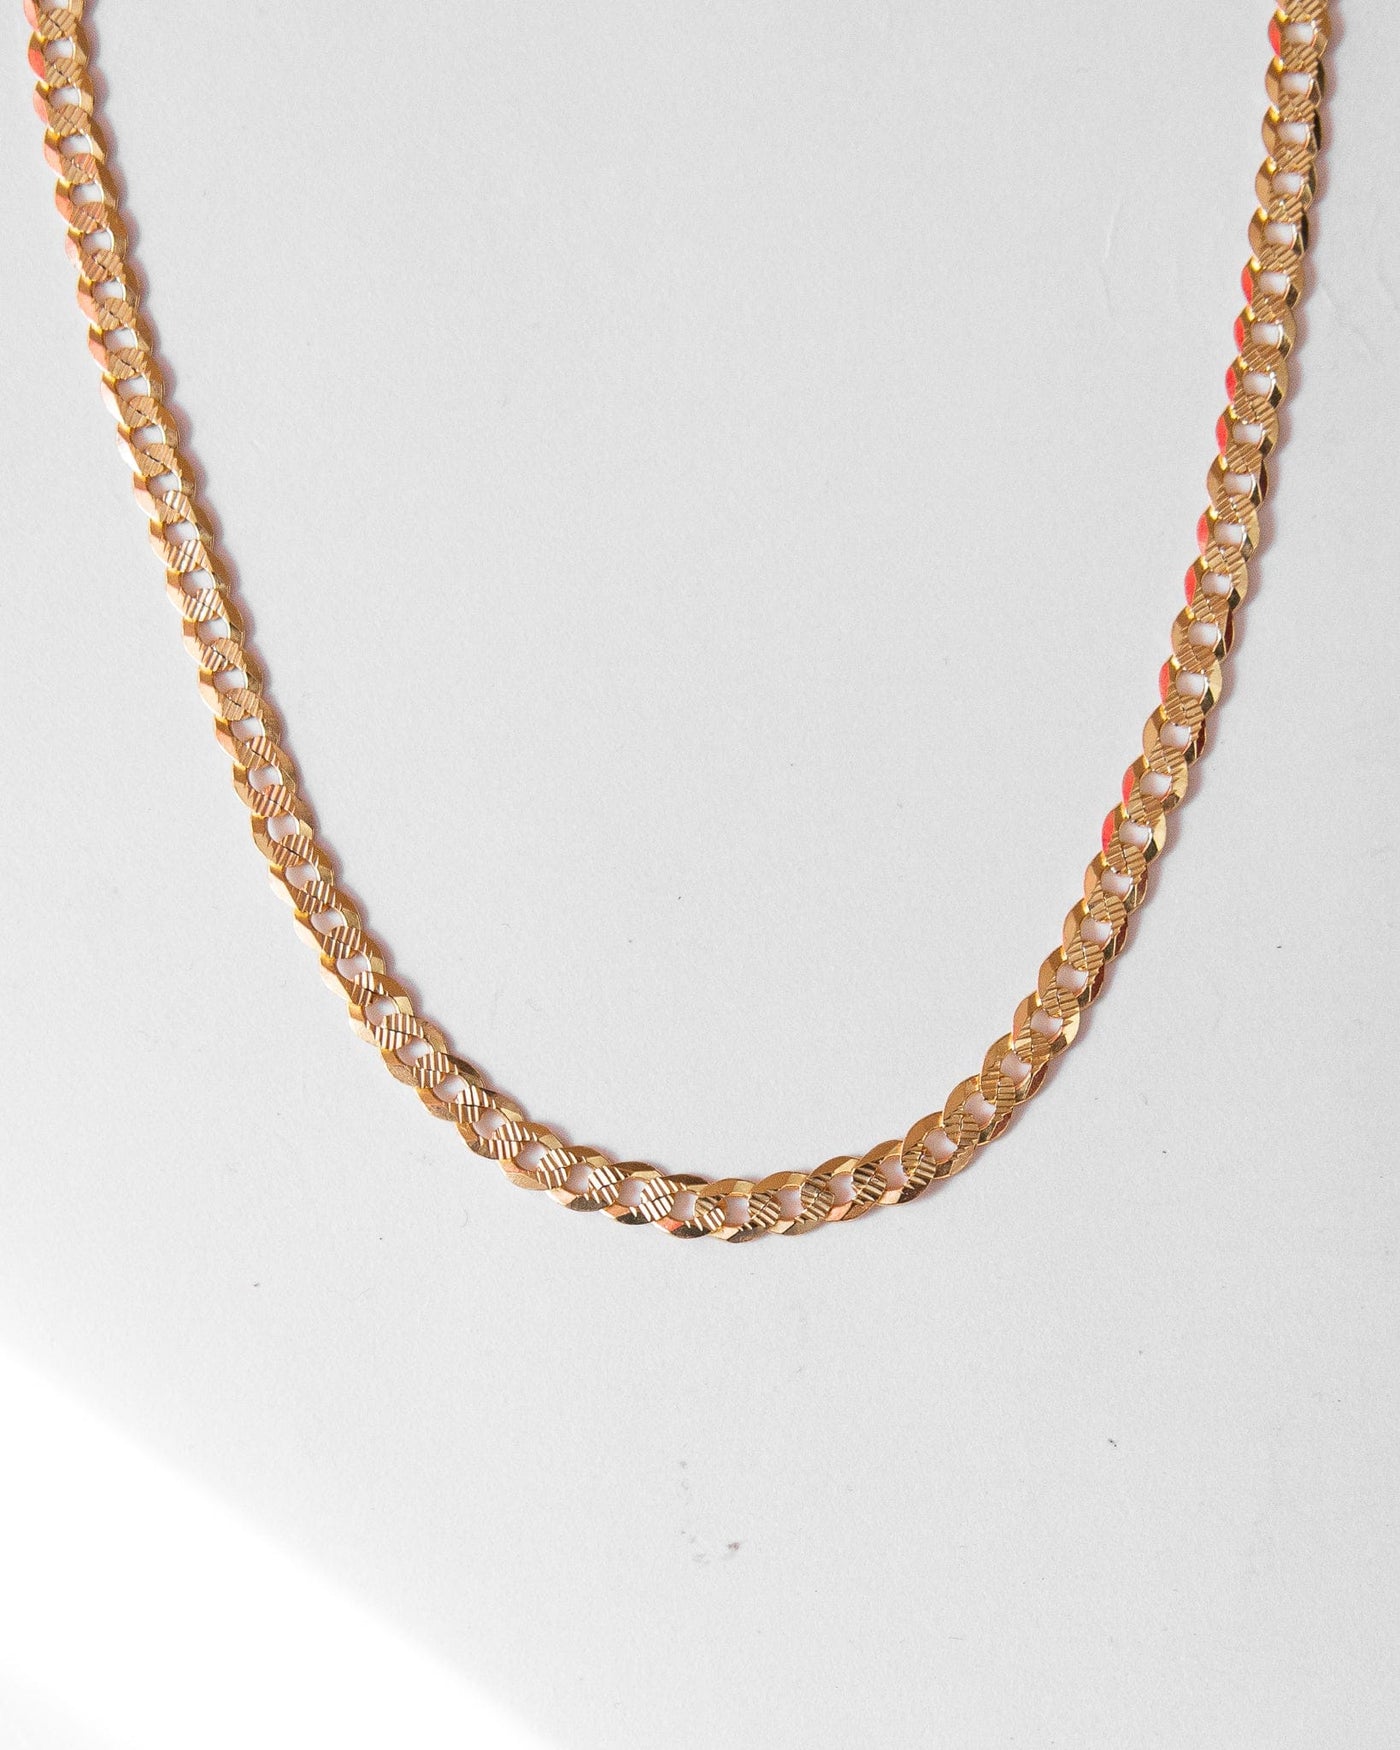 N O L O - "The Classic Cuban" Gold Necklace